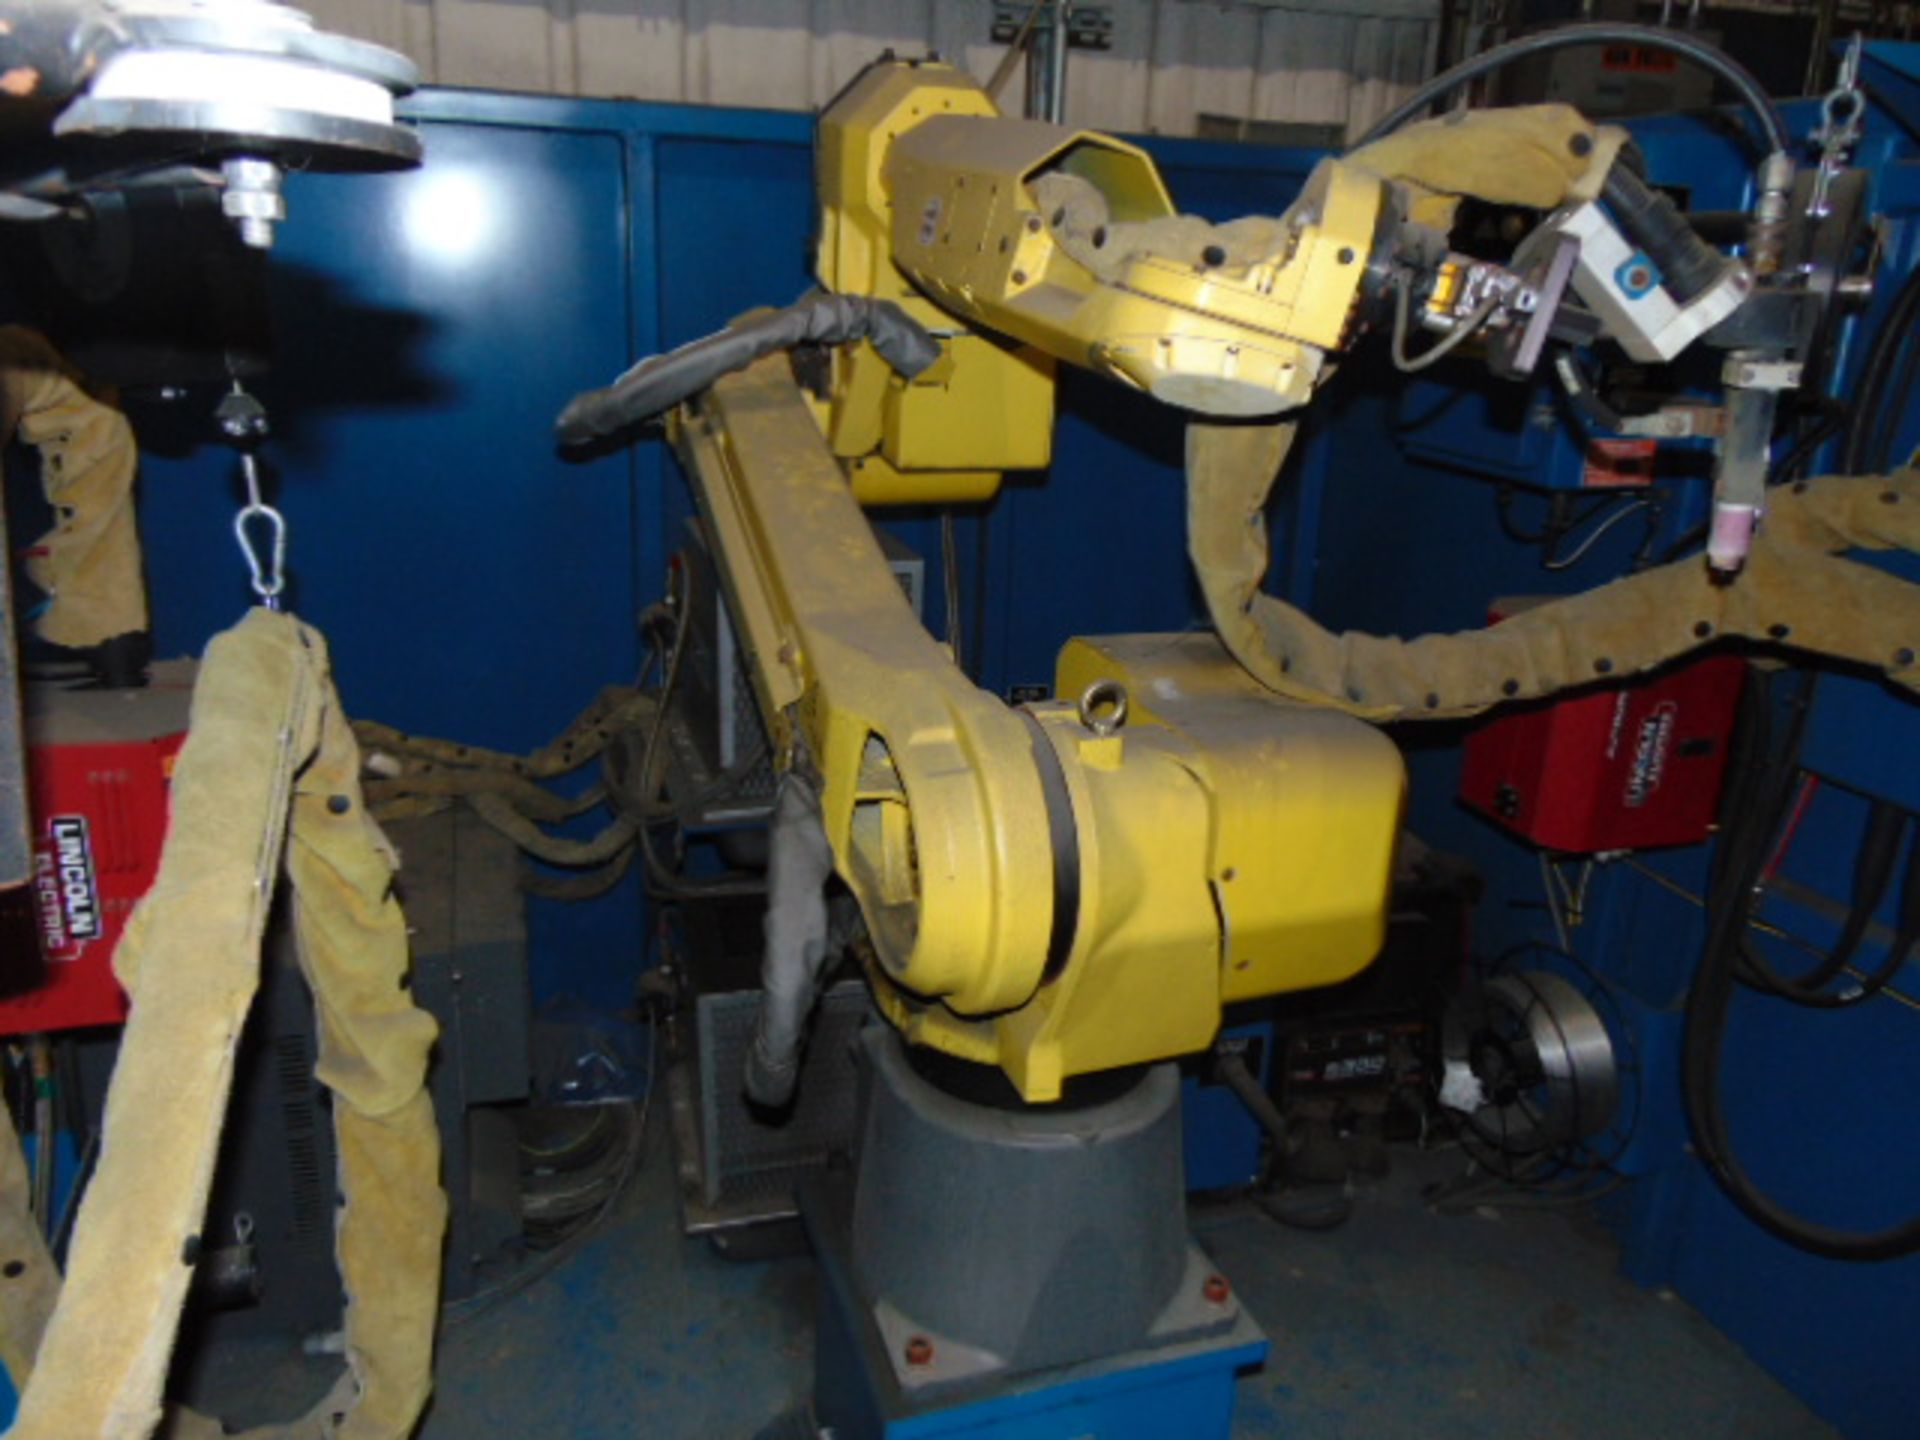 ROBOTIC WELD OVERLAY SYSTEM, ARC SPECIALTIES MDL. GMAW-GTAW ROBOT, new 2013, Fanuc Arcmate Mdl. - Image 3 of 9